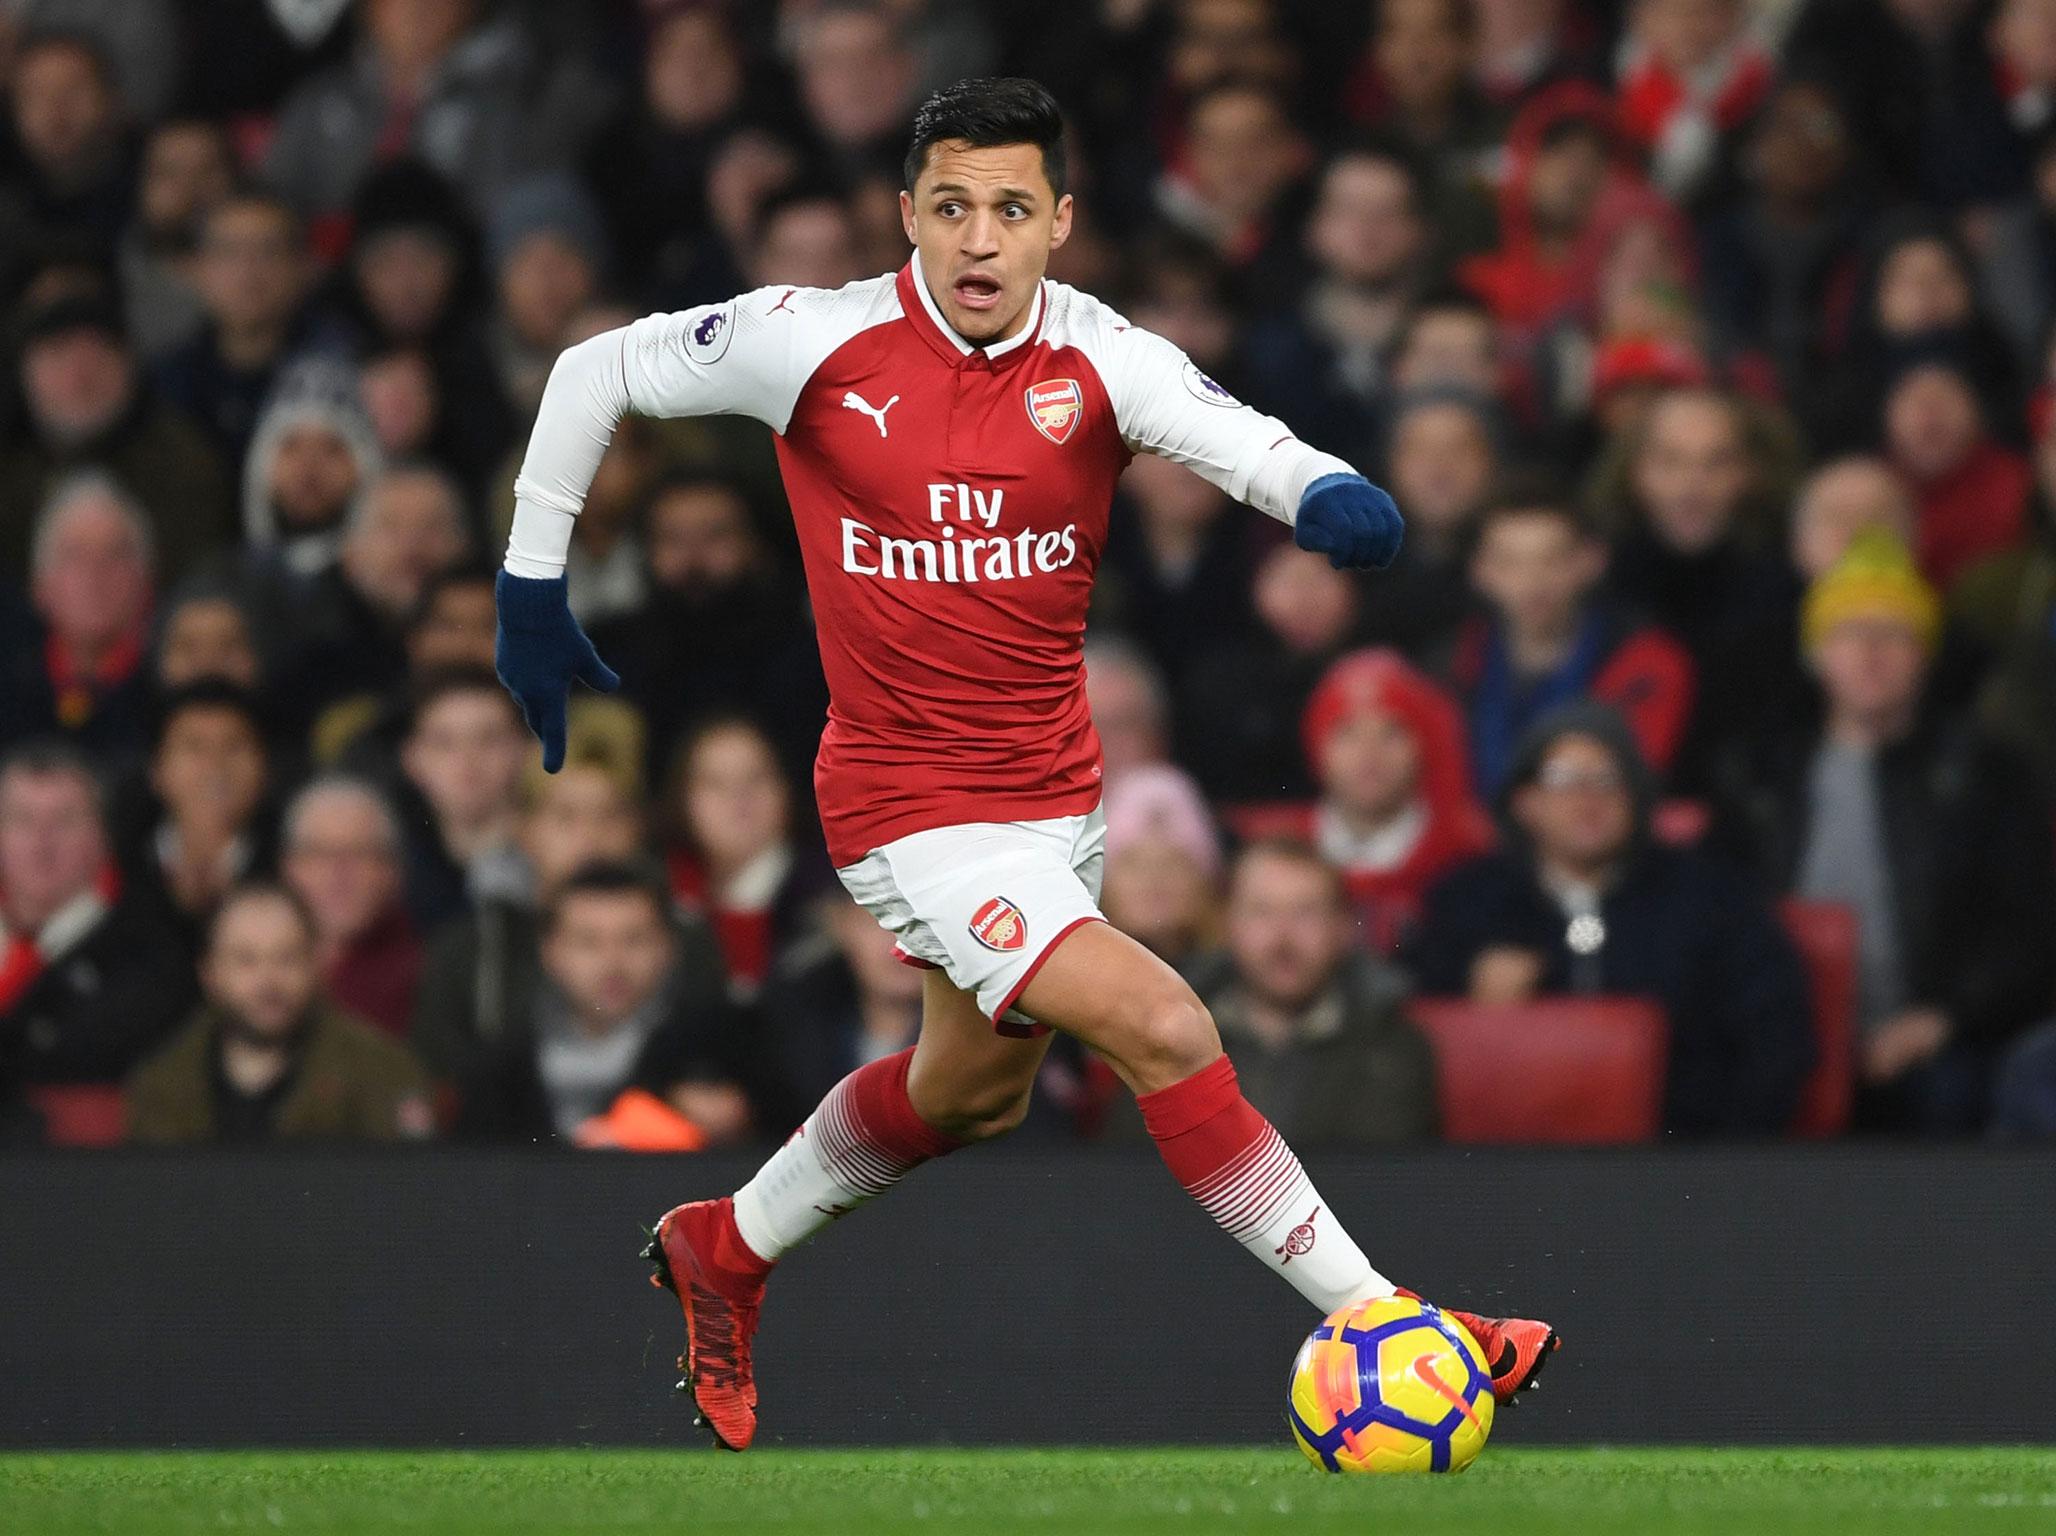 Transfer news LIVE: Manchester United and Arsenal agree Henrikh Mkhitaryan-Alexis Sanchez deal, Liverpool latest